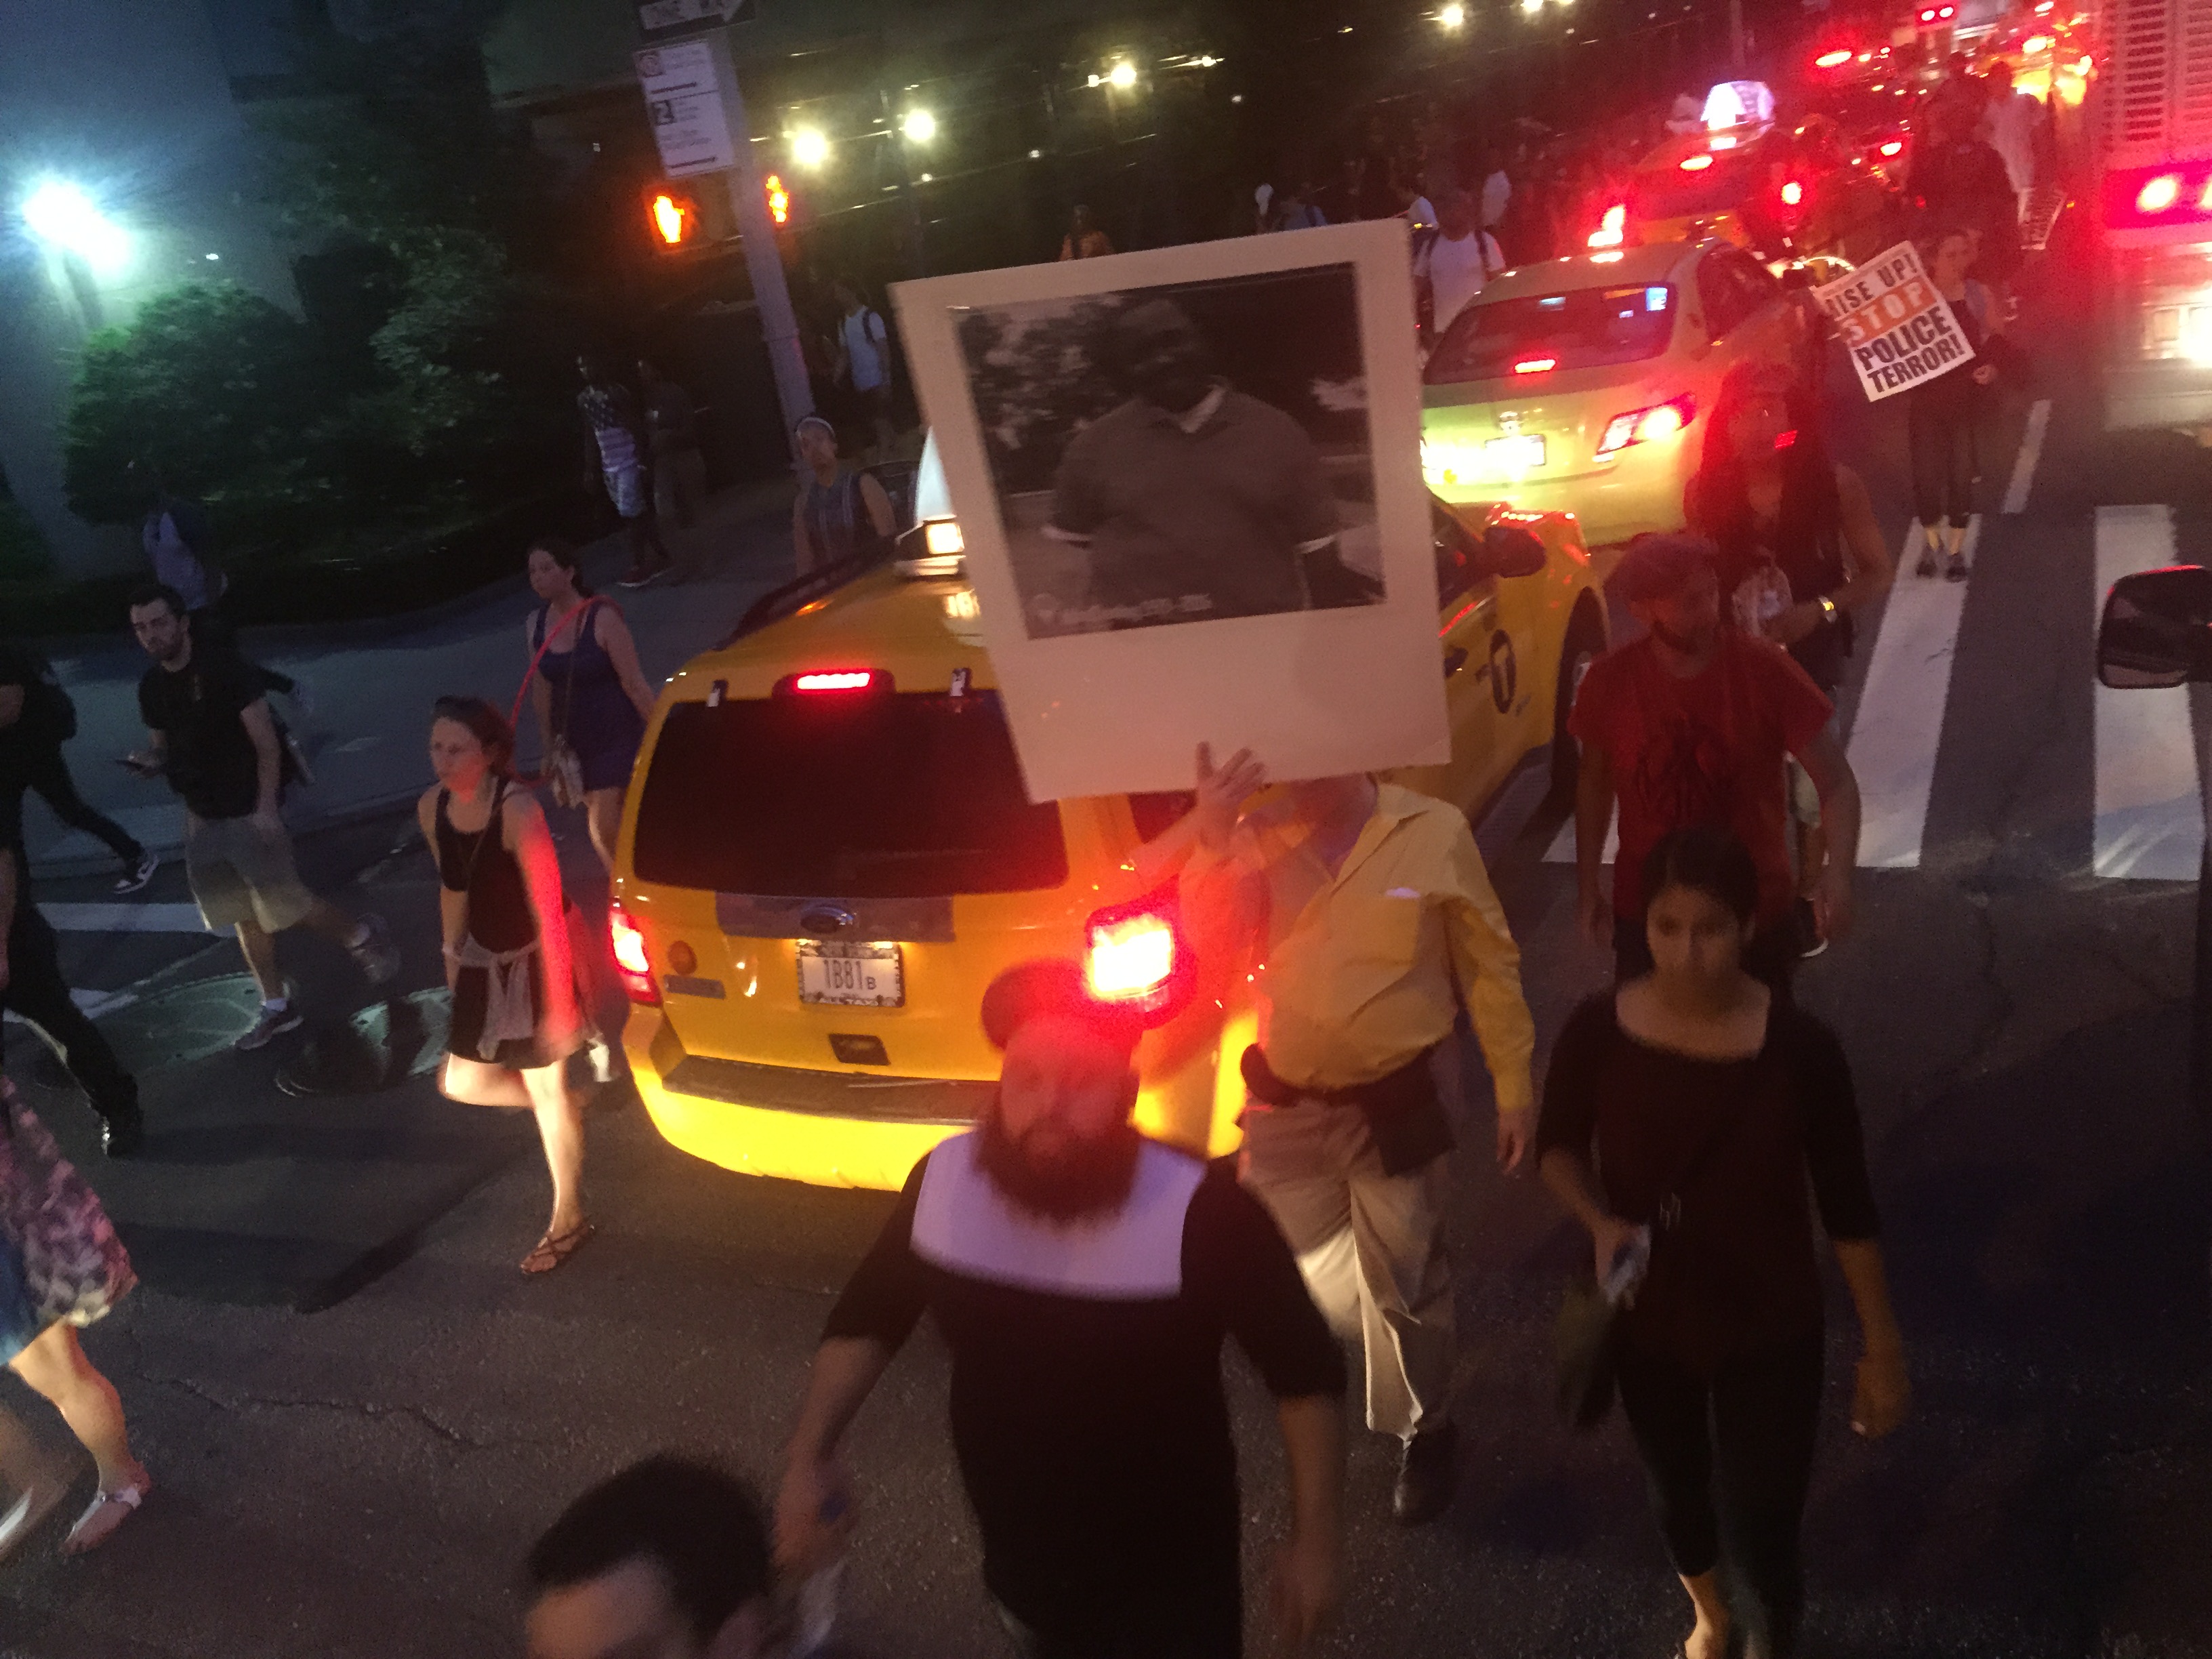 Police Violence Protest: Fifth Avenue At 96th Street